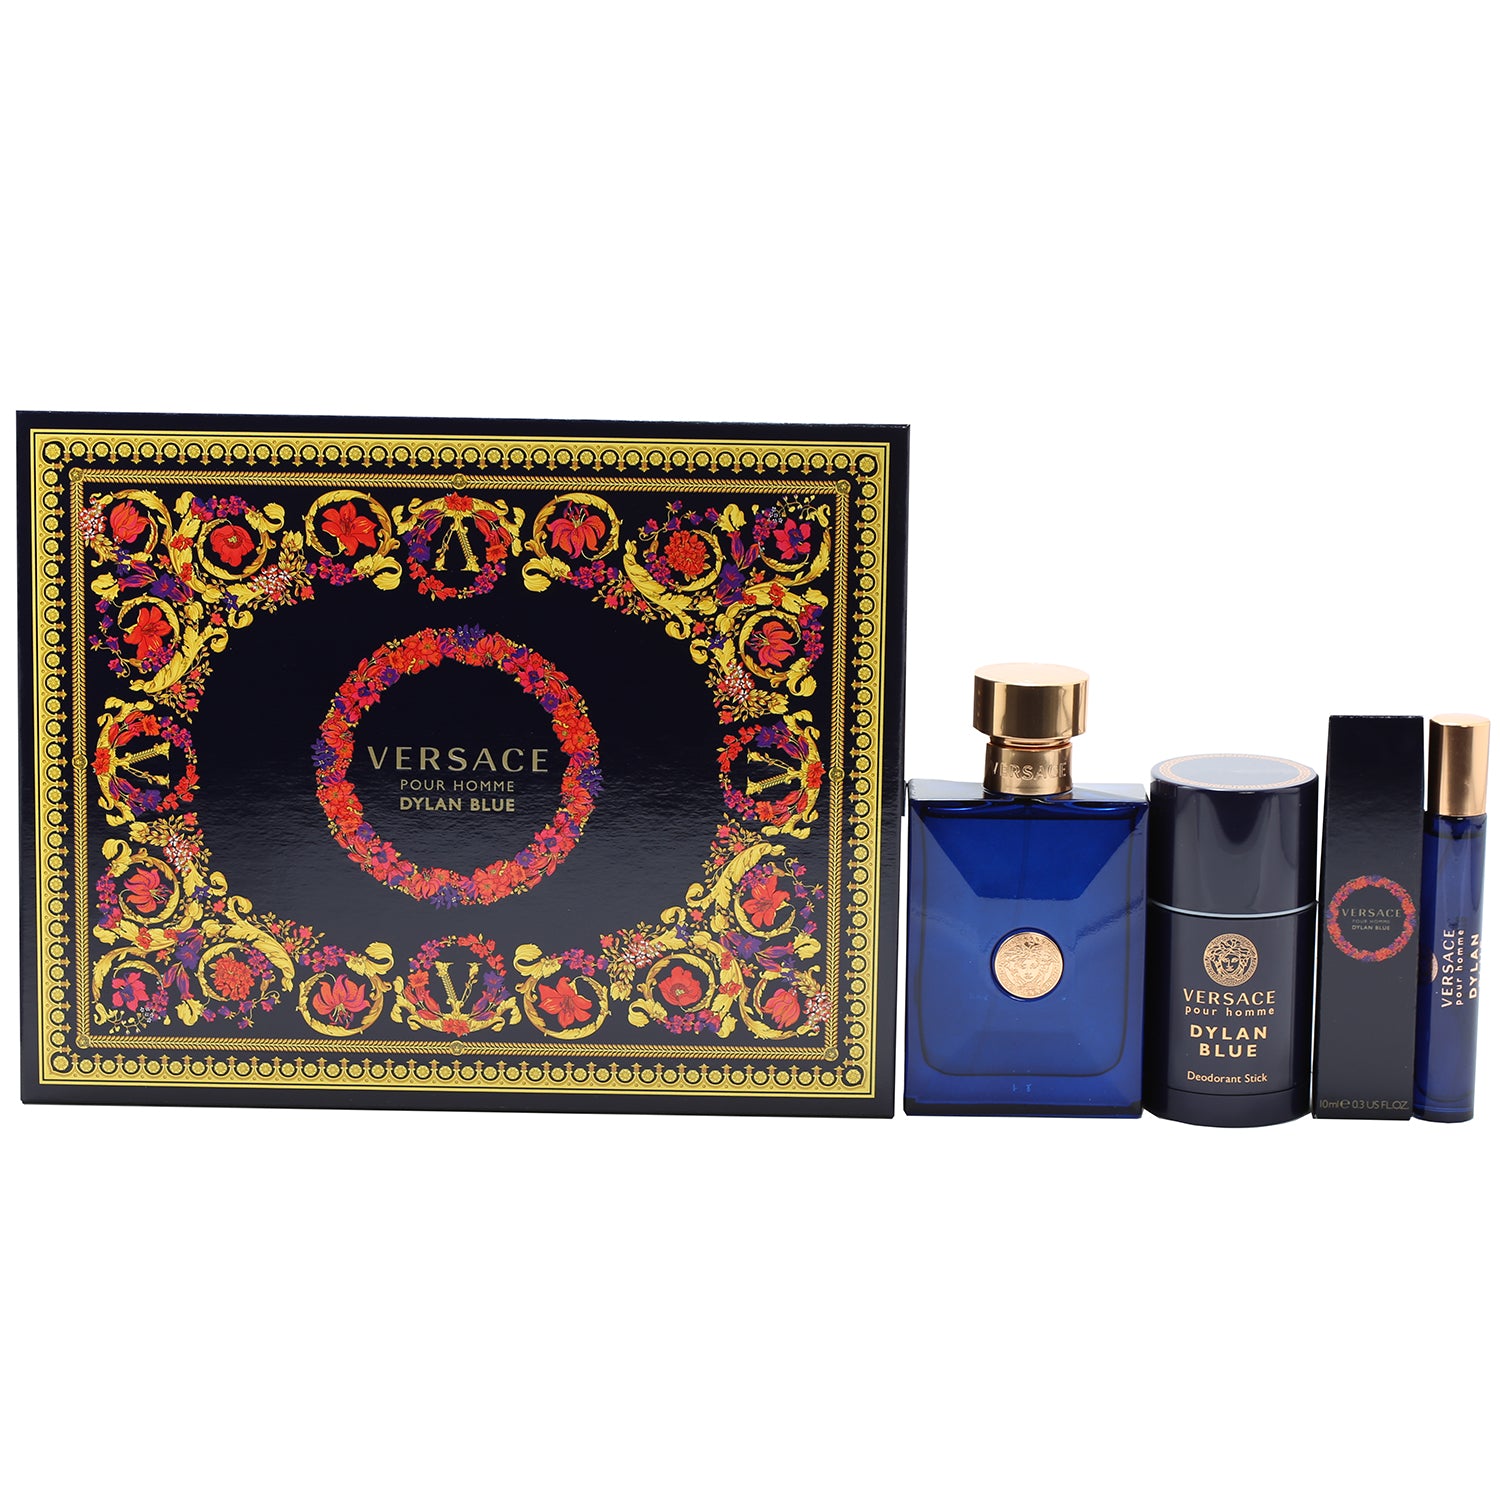 VERSACE DYLAN BLUE by Gianni Versace EAU DE PARFUM SPRAY 3.4 OZ for WOMEN  And a Mystery Name brand sample vile